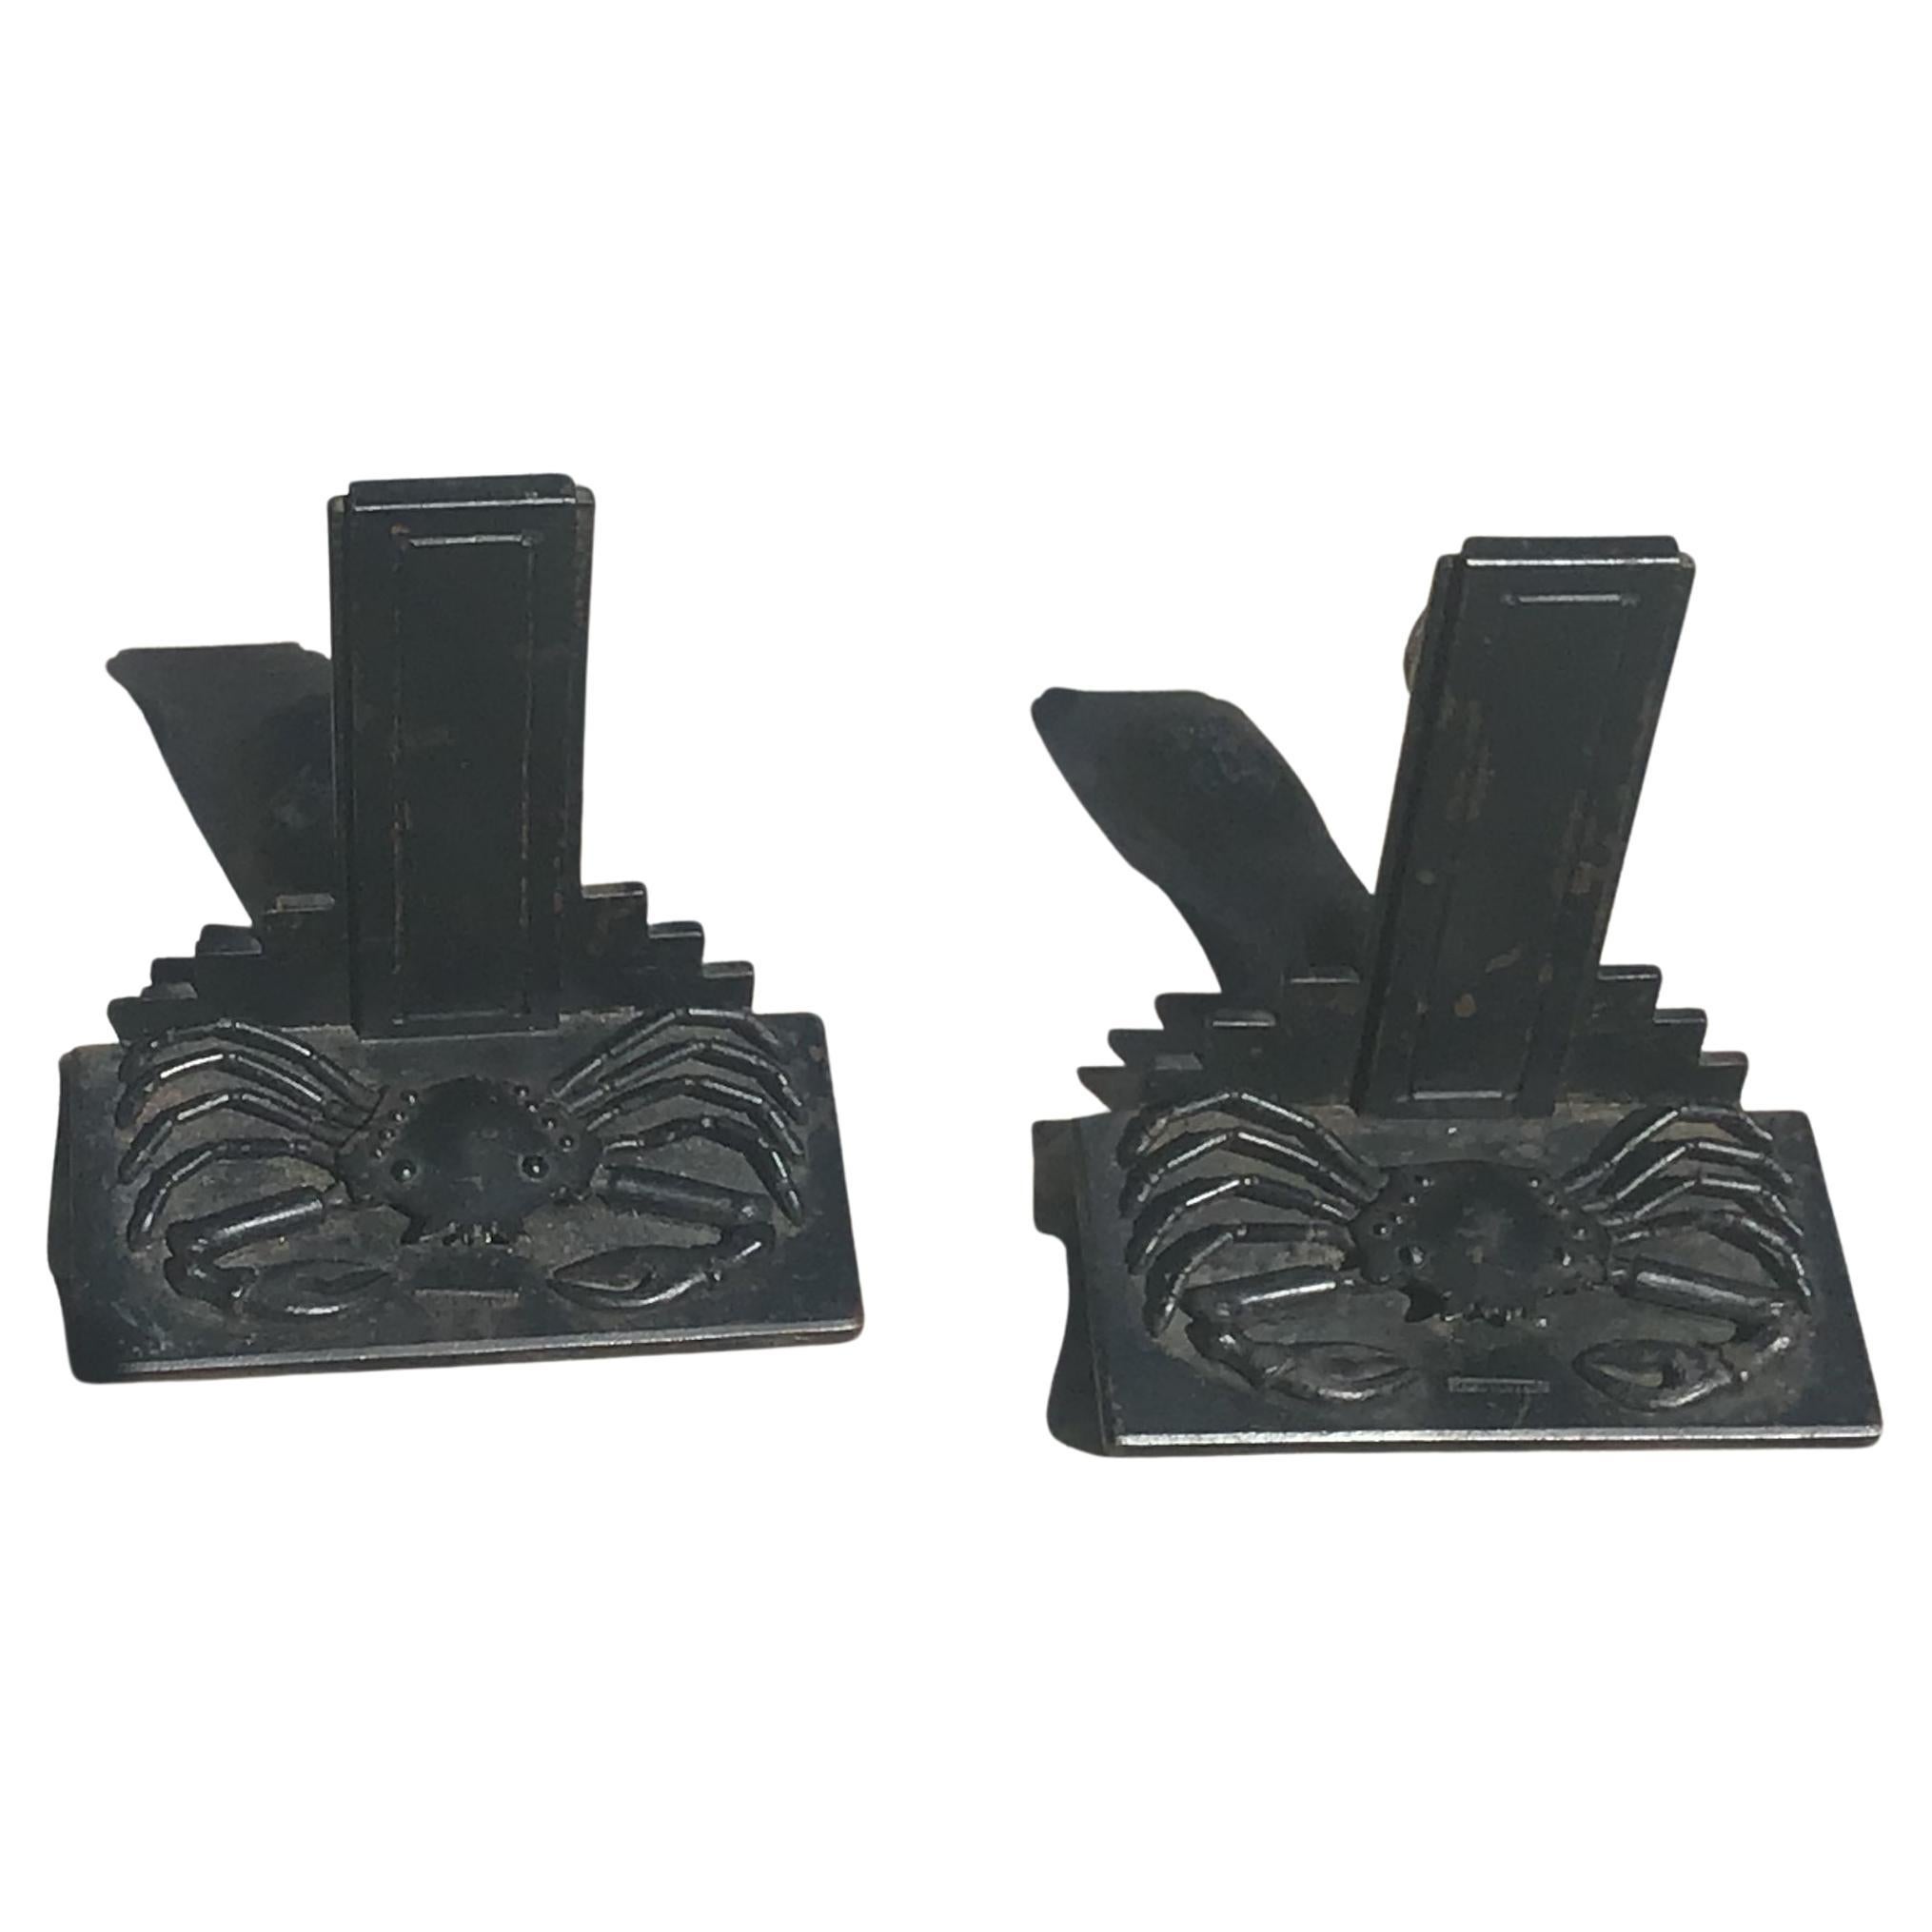 Alessandro Mazzucotelli Bookends Wrought Iron 1910 Italy For Sale